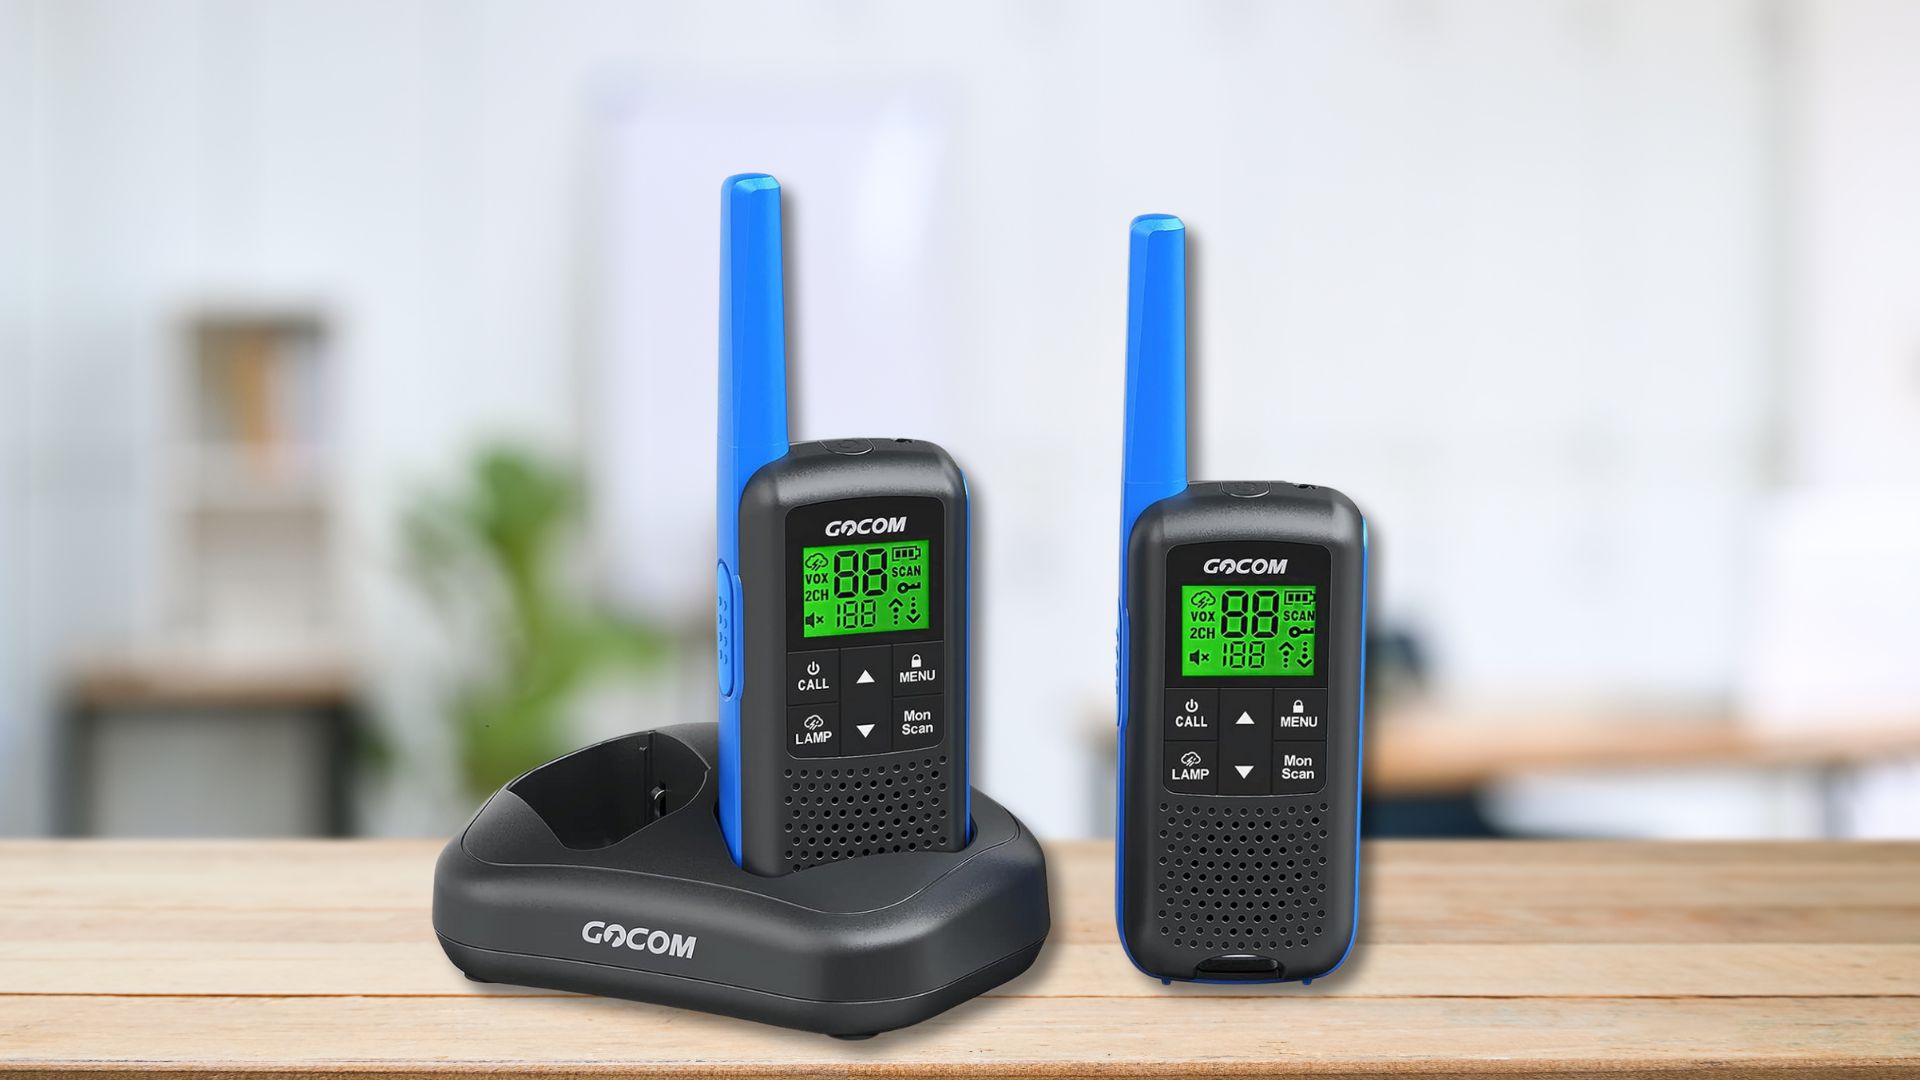 2 GOCOM FRS two way radios one sitting in a charging cradle and both sitting on a wood counter